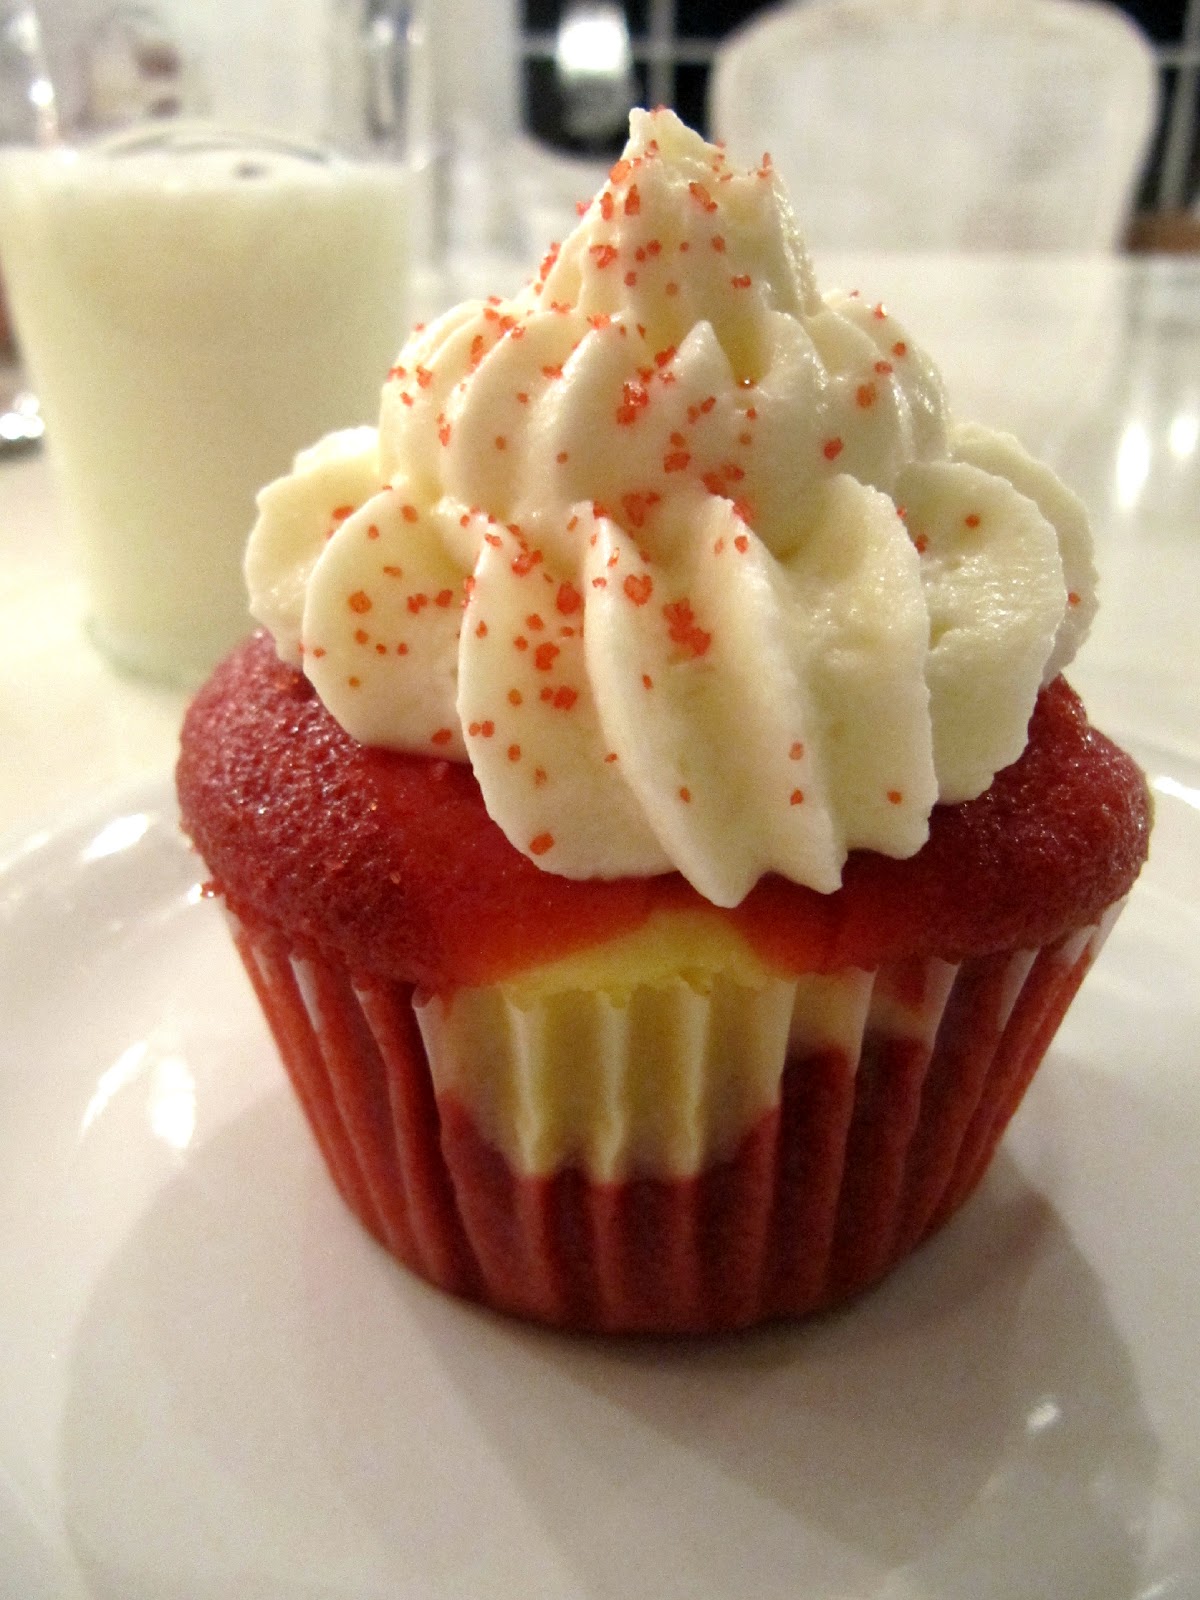 whitleigh cupcakes: Southern Red Velvet Cheesecake Cupcakes